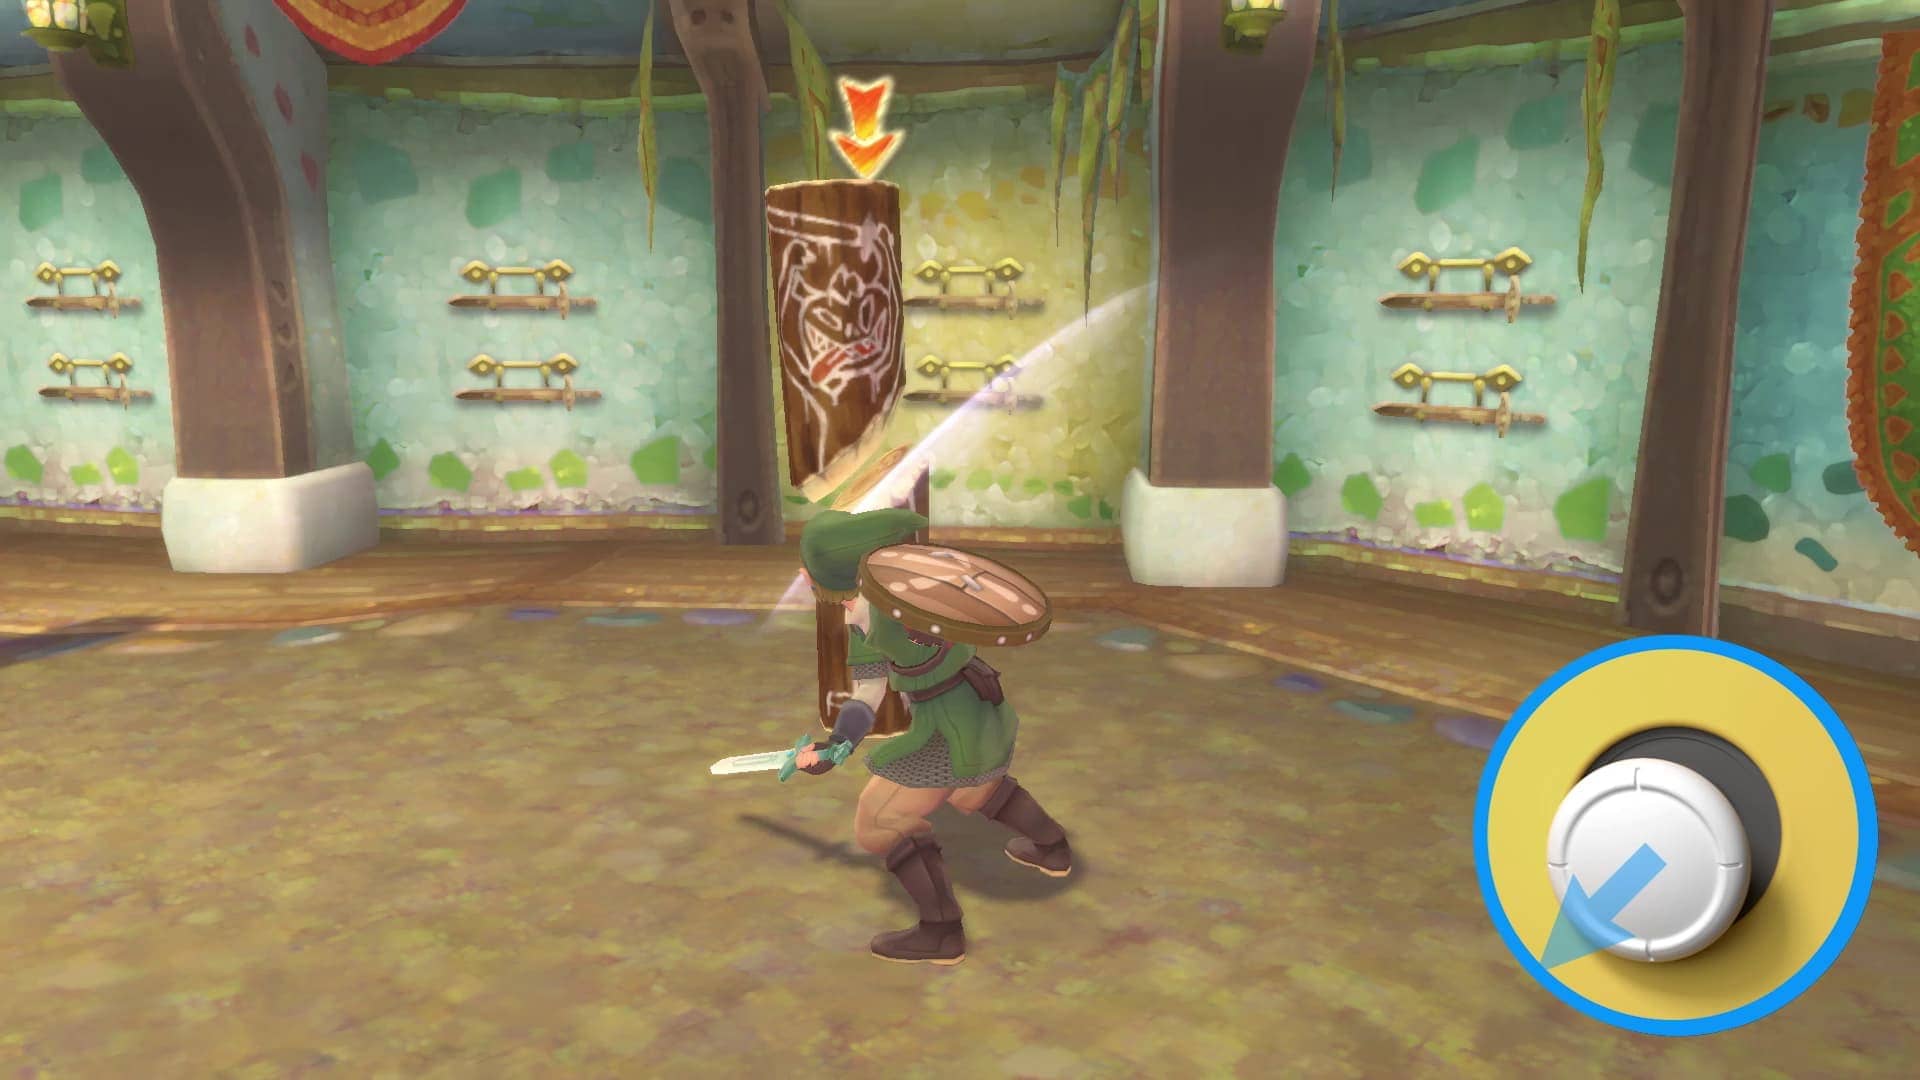 Gameplay footage demonstrating how you can use button controls to change the direction of Link's sword swing.